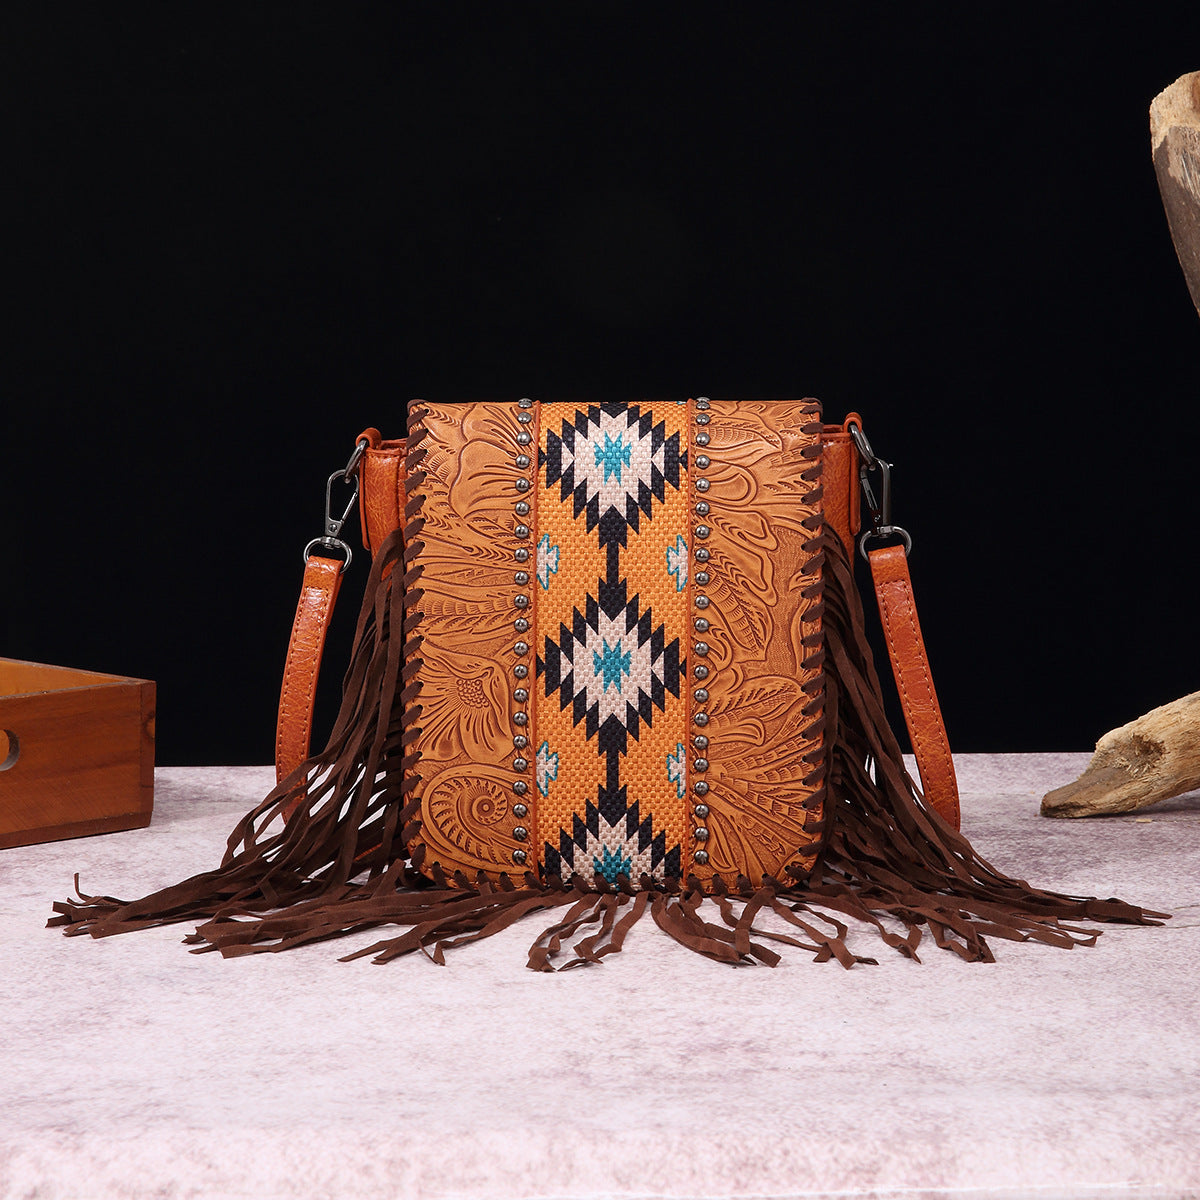 Bohemian style leather carving one-shoulder crossbody women's bag